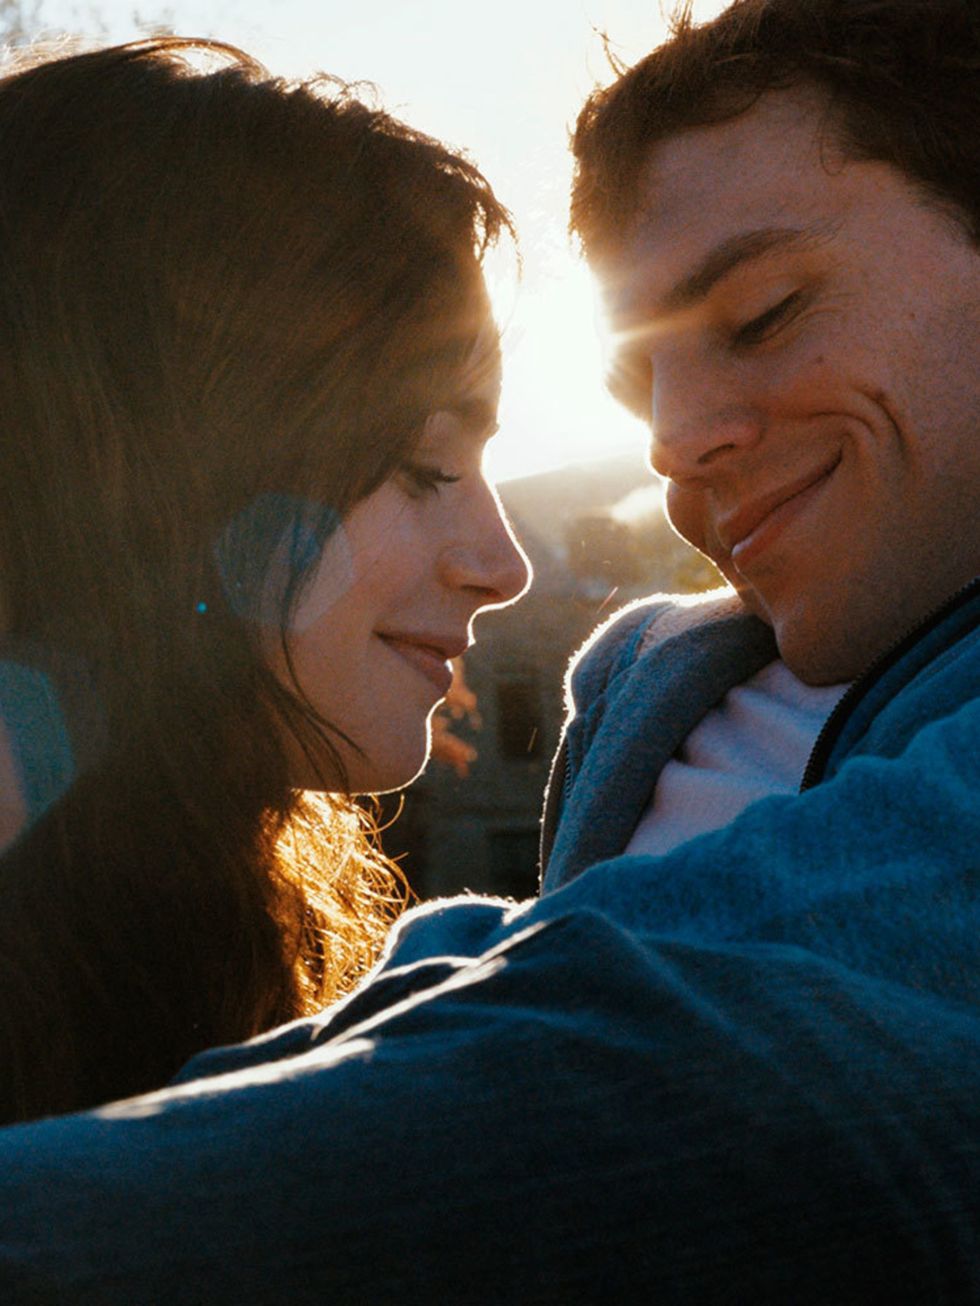 <p><strong>FILM: LOVE, ROSIE</strong></p>

<p>Based on the book Where Rainbows End, Lily Collins stars alongside Sam Claflin in this long-anticipated rom-com.</p>

<p>Featuring love, laughter and much embarrassment, the movie asks the question: Do you re